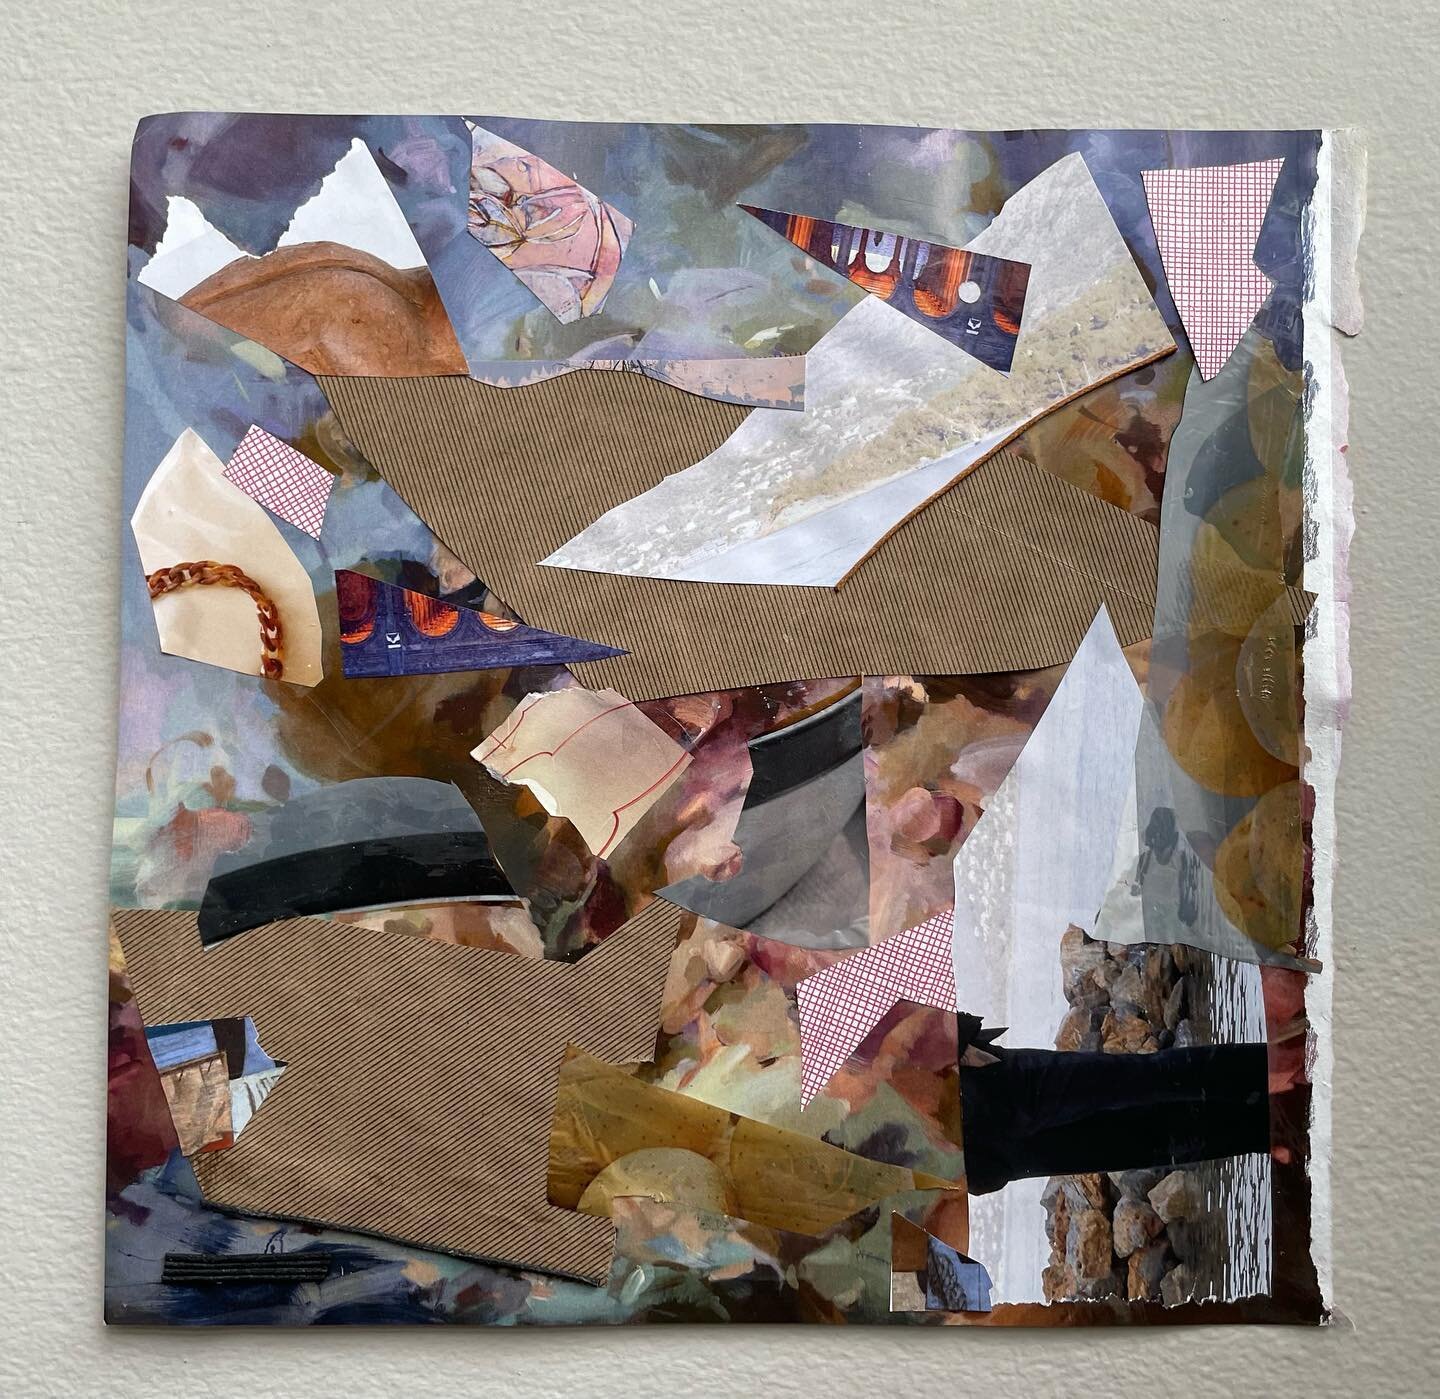 ᵐᵉᵈⁱᵗᵃᵗⁱᵛᵉ ᵛⁱˢⁱᵒⁿ

Collage, cut paper, plastic, acrylic and glue on found paper
10.5in. square
Feb 2023
&bull;
#foundpaper #envelope #abstractcollage #analogcollage #assemblage #sea #sky #collagecollective #maximalistcollage #dreamy #geometricart